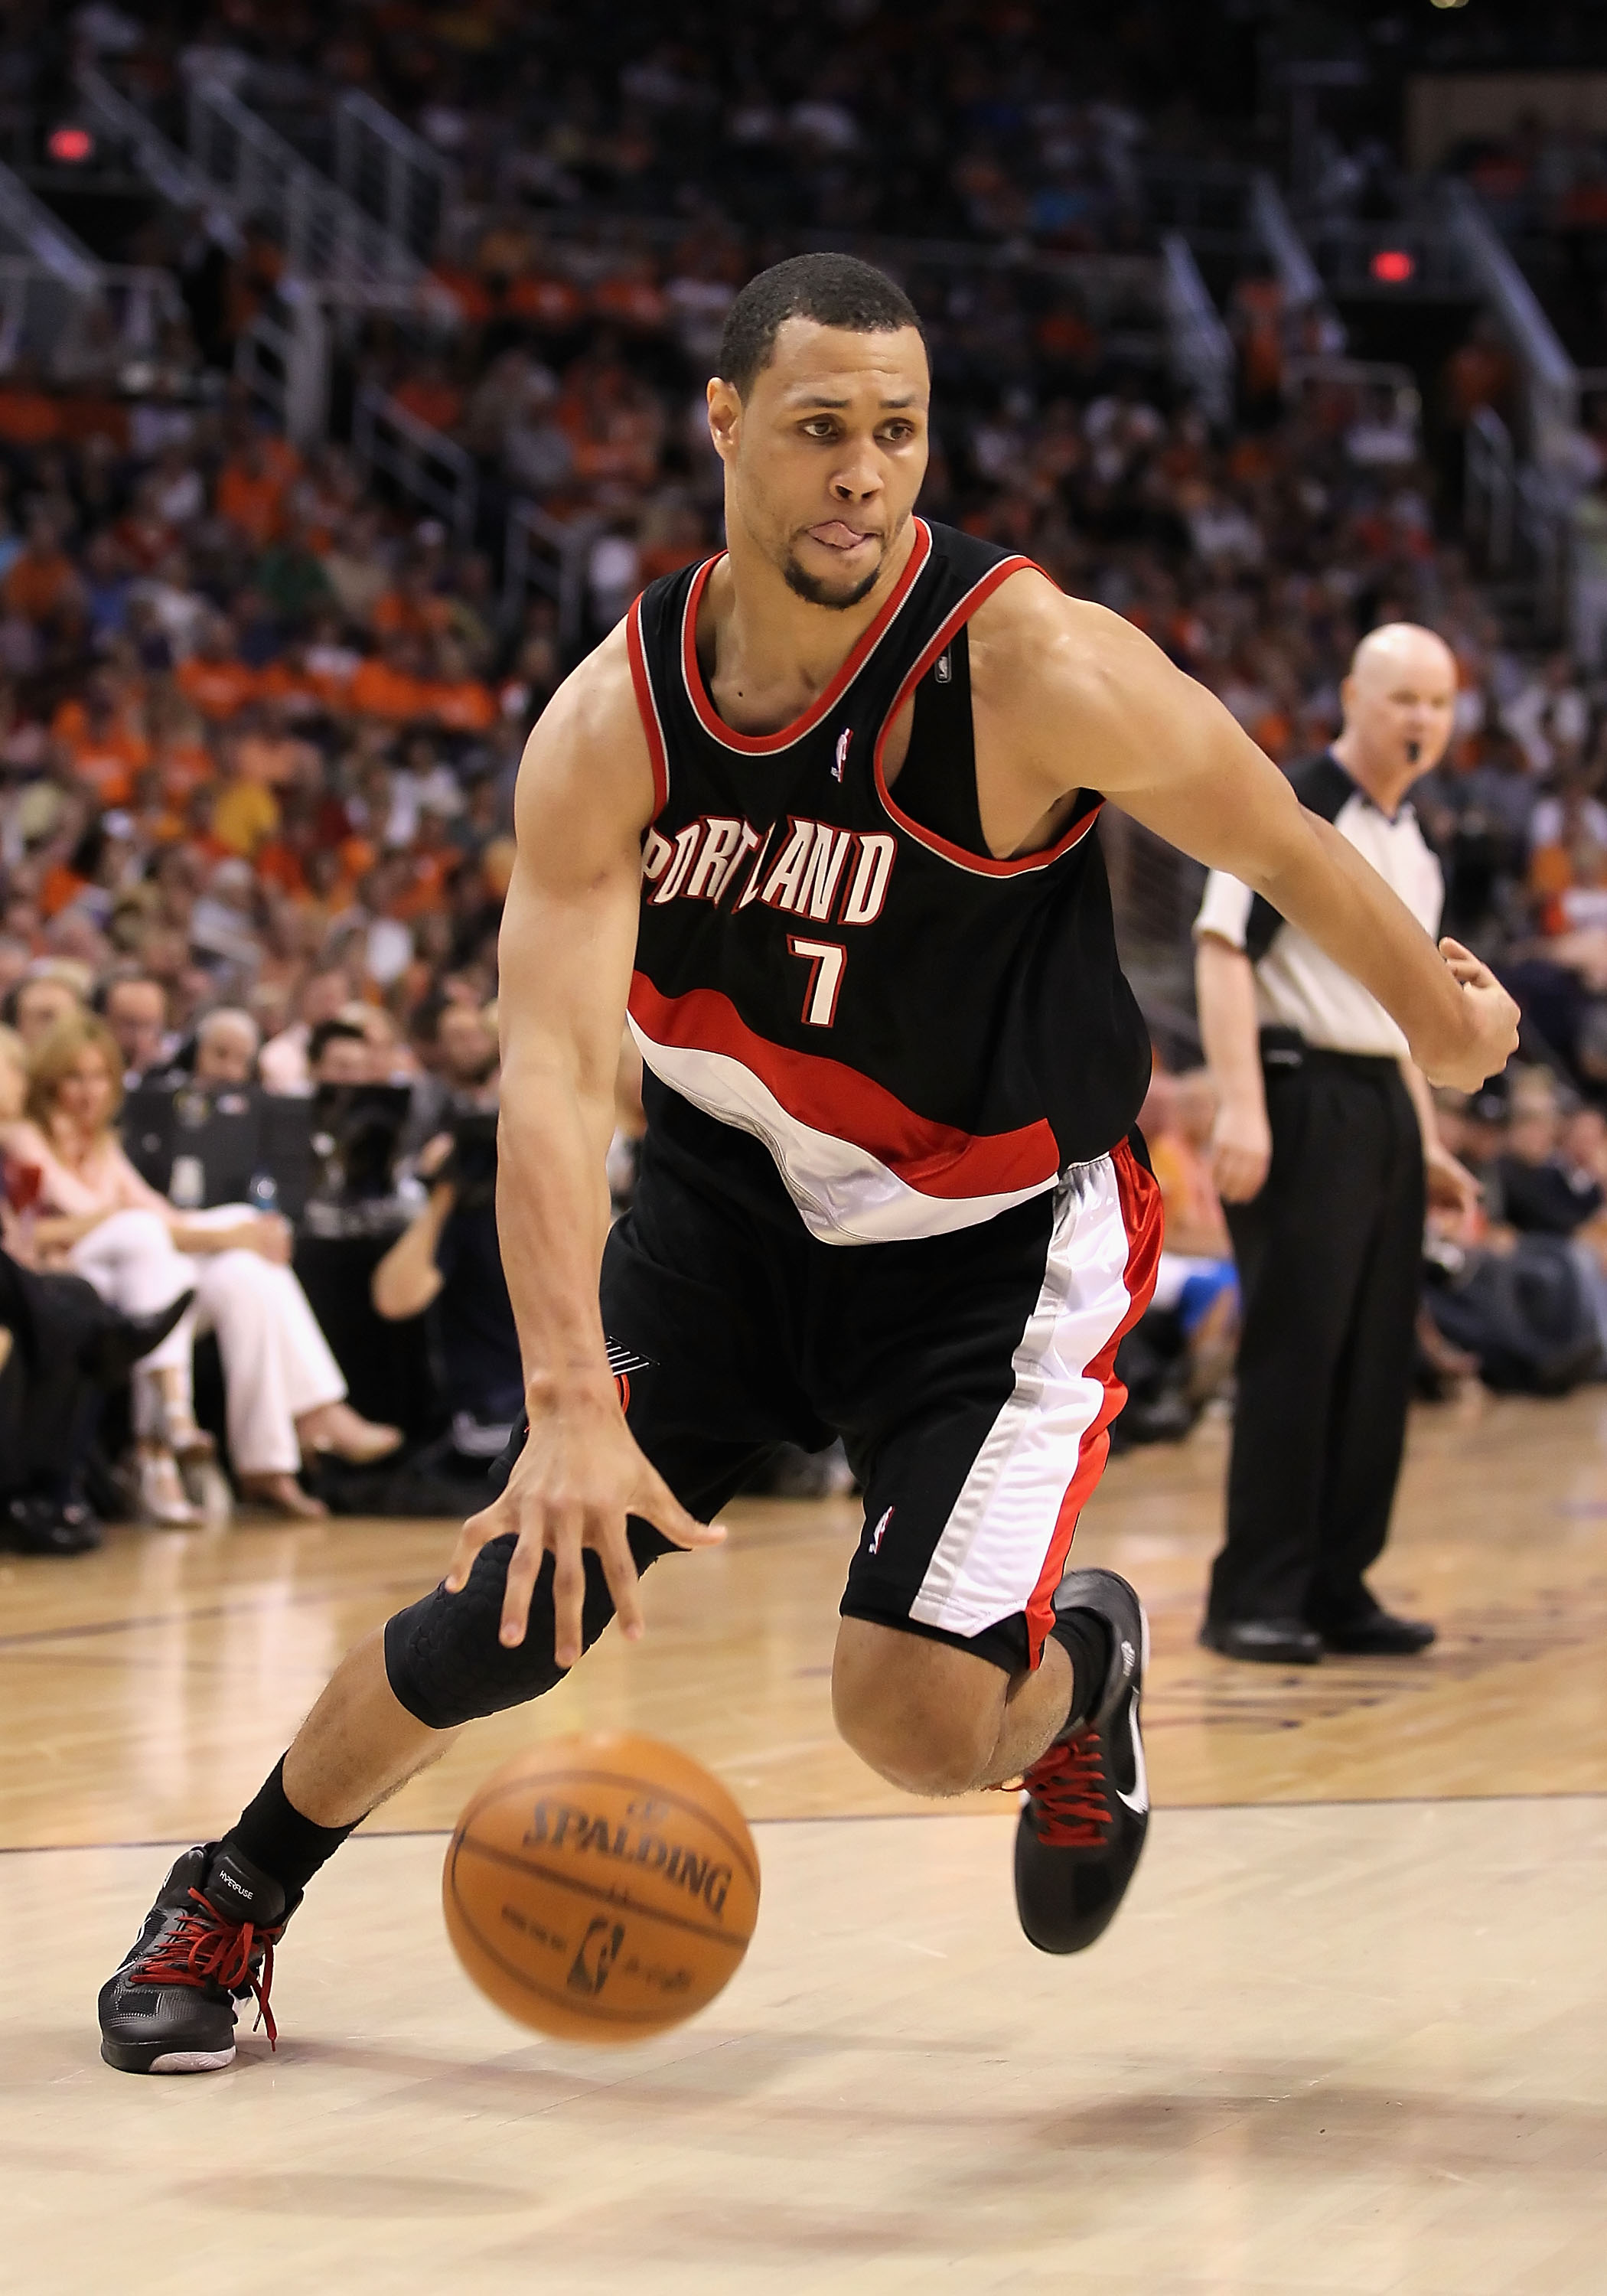 PHOENIX - APRIL 26:  Brandon Roy #7 of the Portland Trail Blazers handles the ball during Game Five of the Western Conference Quarterfinals of the 2010 NBA Playoffs against the Phoenix Suns at US Airways Center on April 26, 2010 in Phoenix, Arizona. NOTE